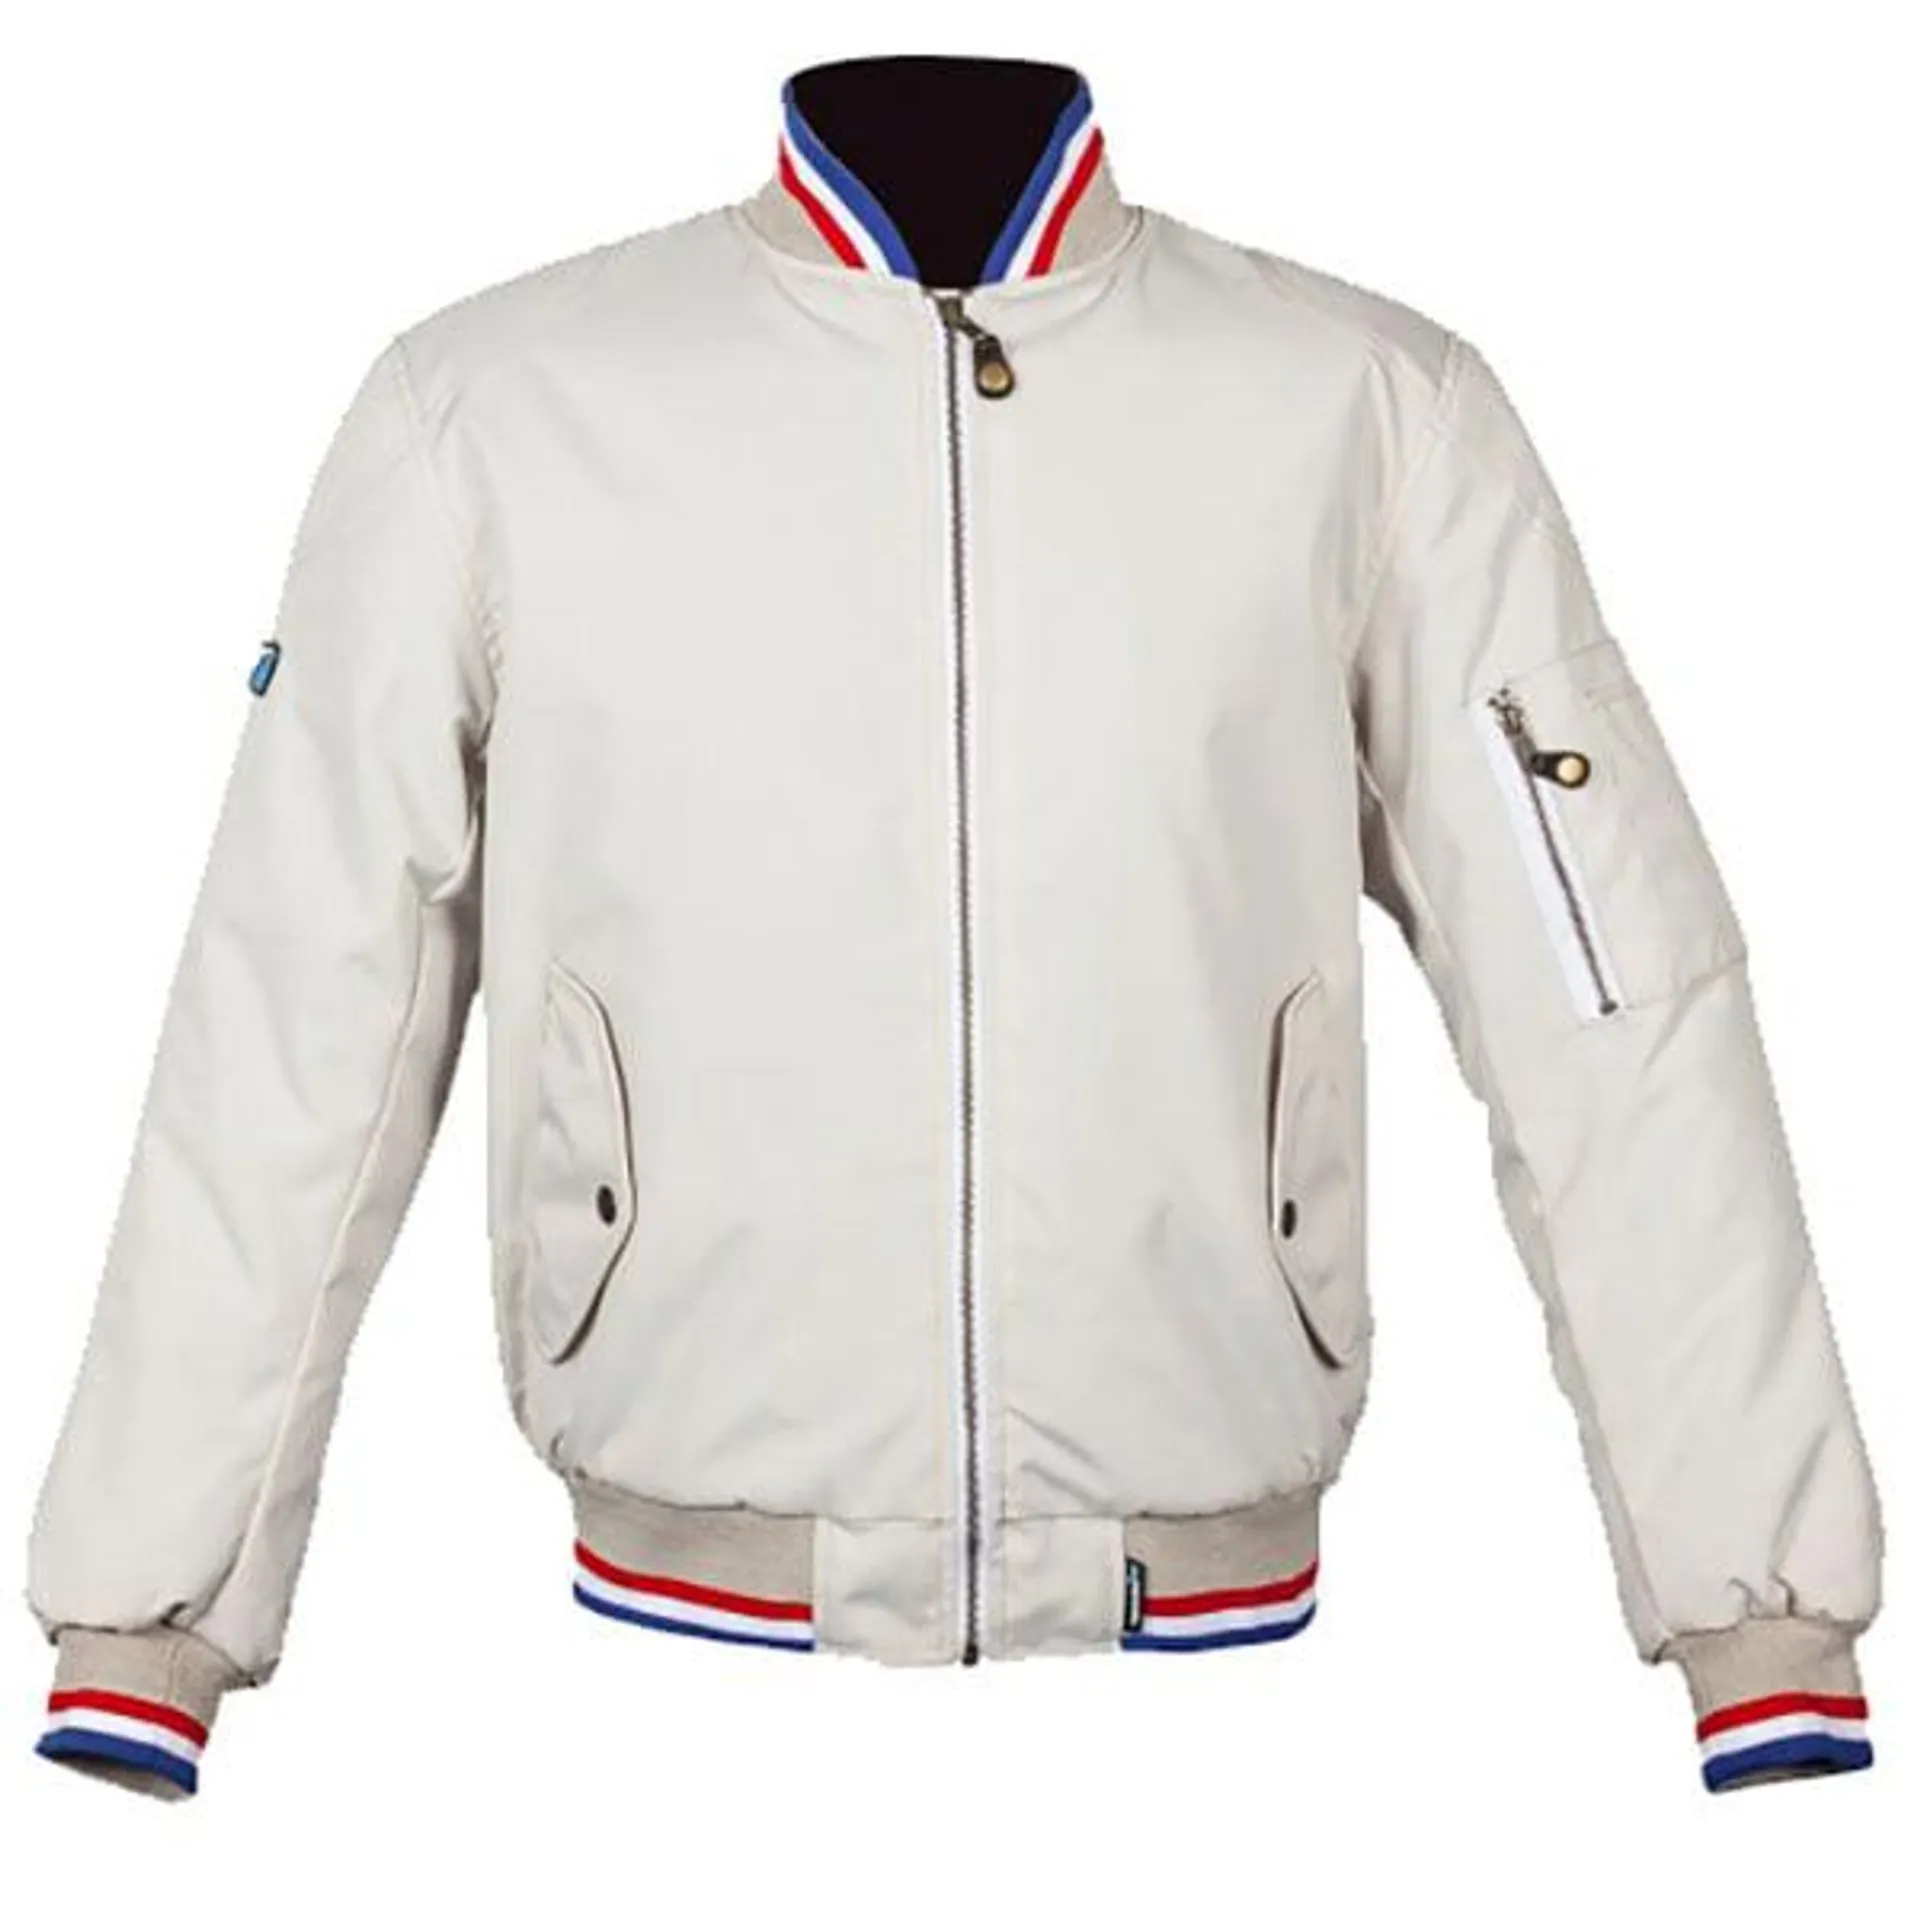 Spada Air Force One CE Textile Jacket - Royale White